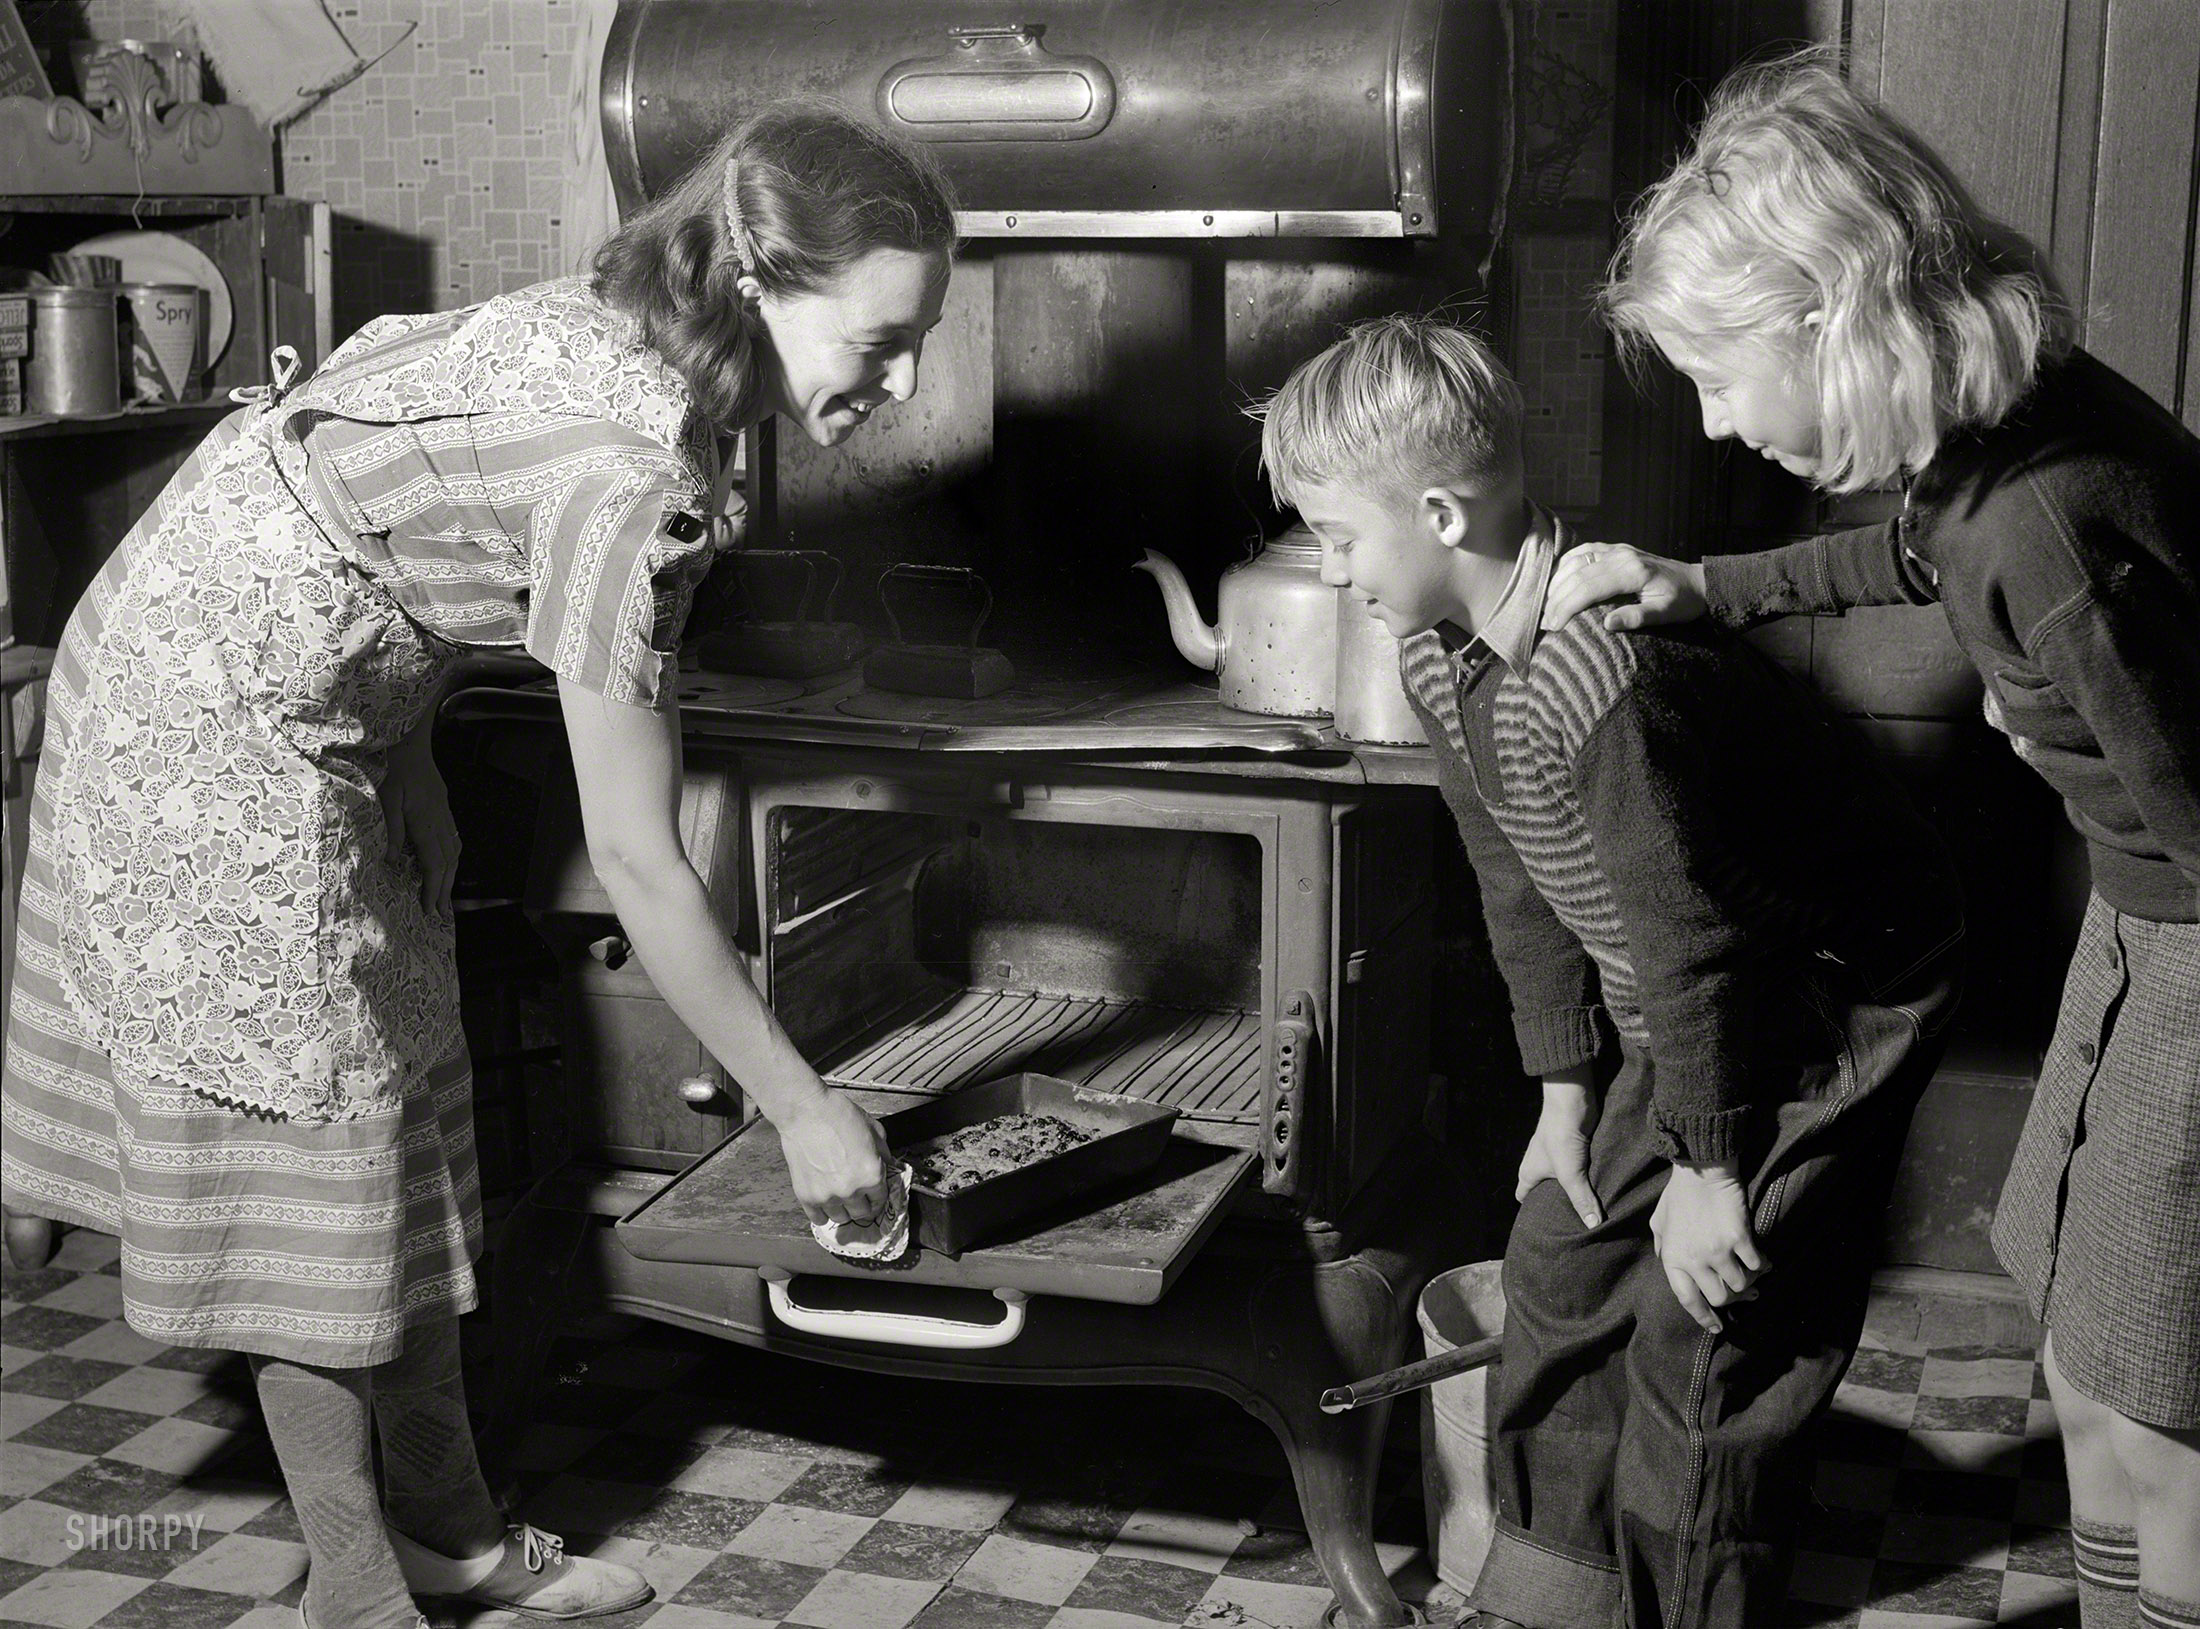 November 1939. "The FSA county home supervisor helps Mrs. Dixon [last seen here] plan a practical way of managing her household. St. Charles County, Mo." Photo by Arthur Rothstein for the Farm Security Administration. View full size.